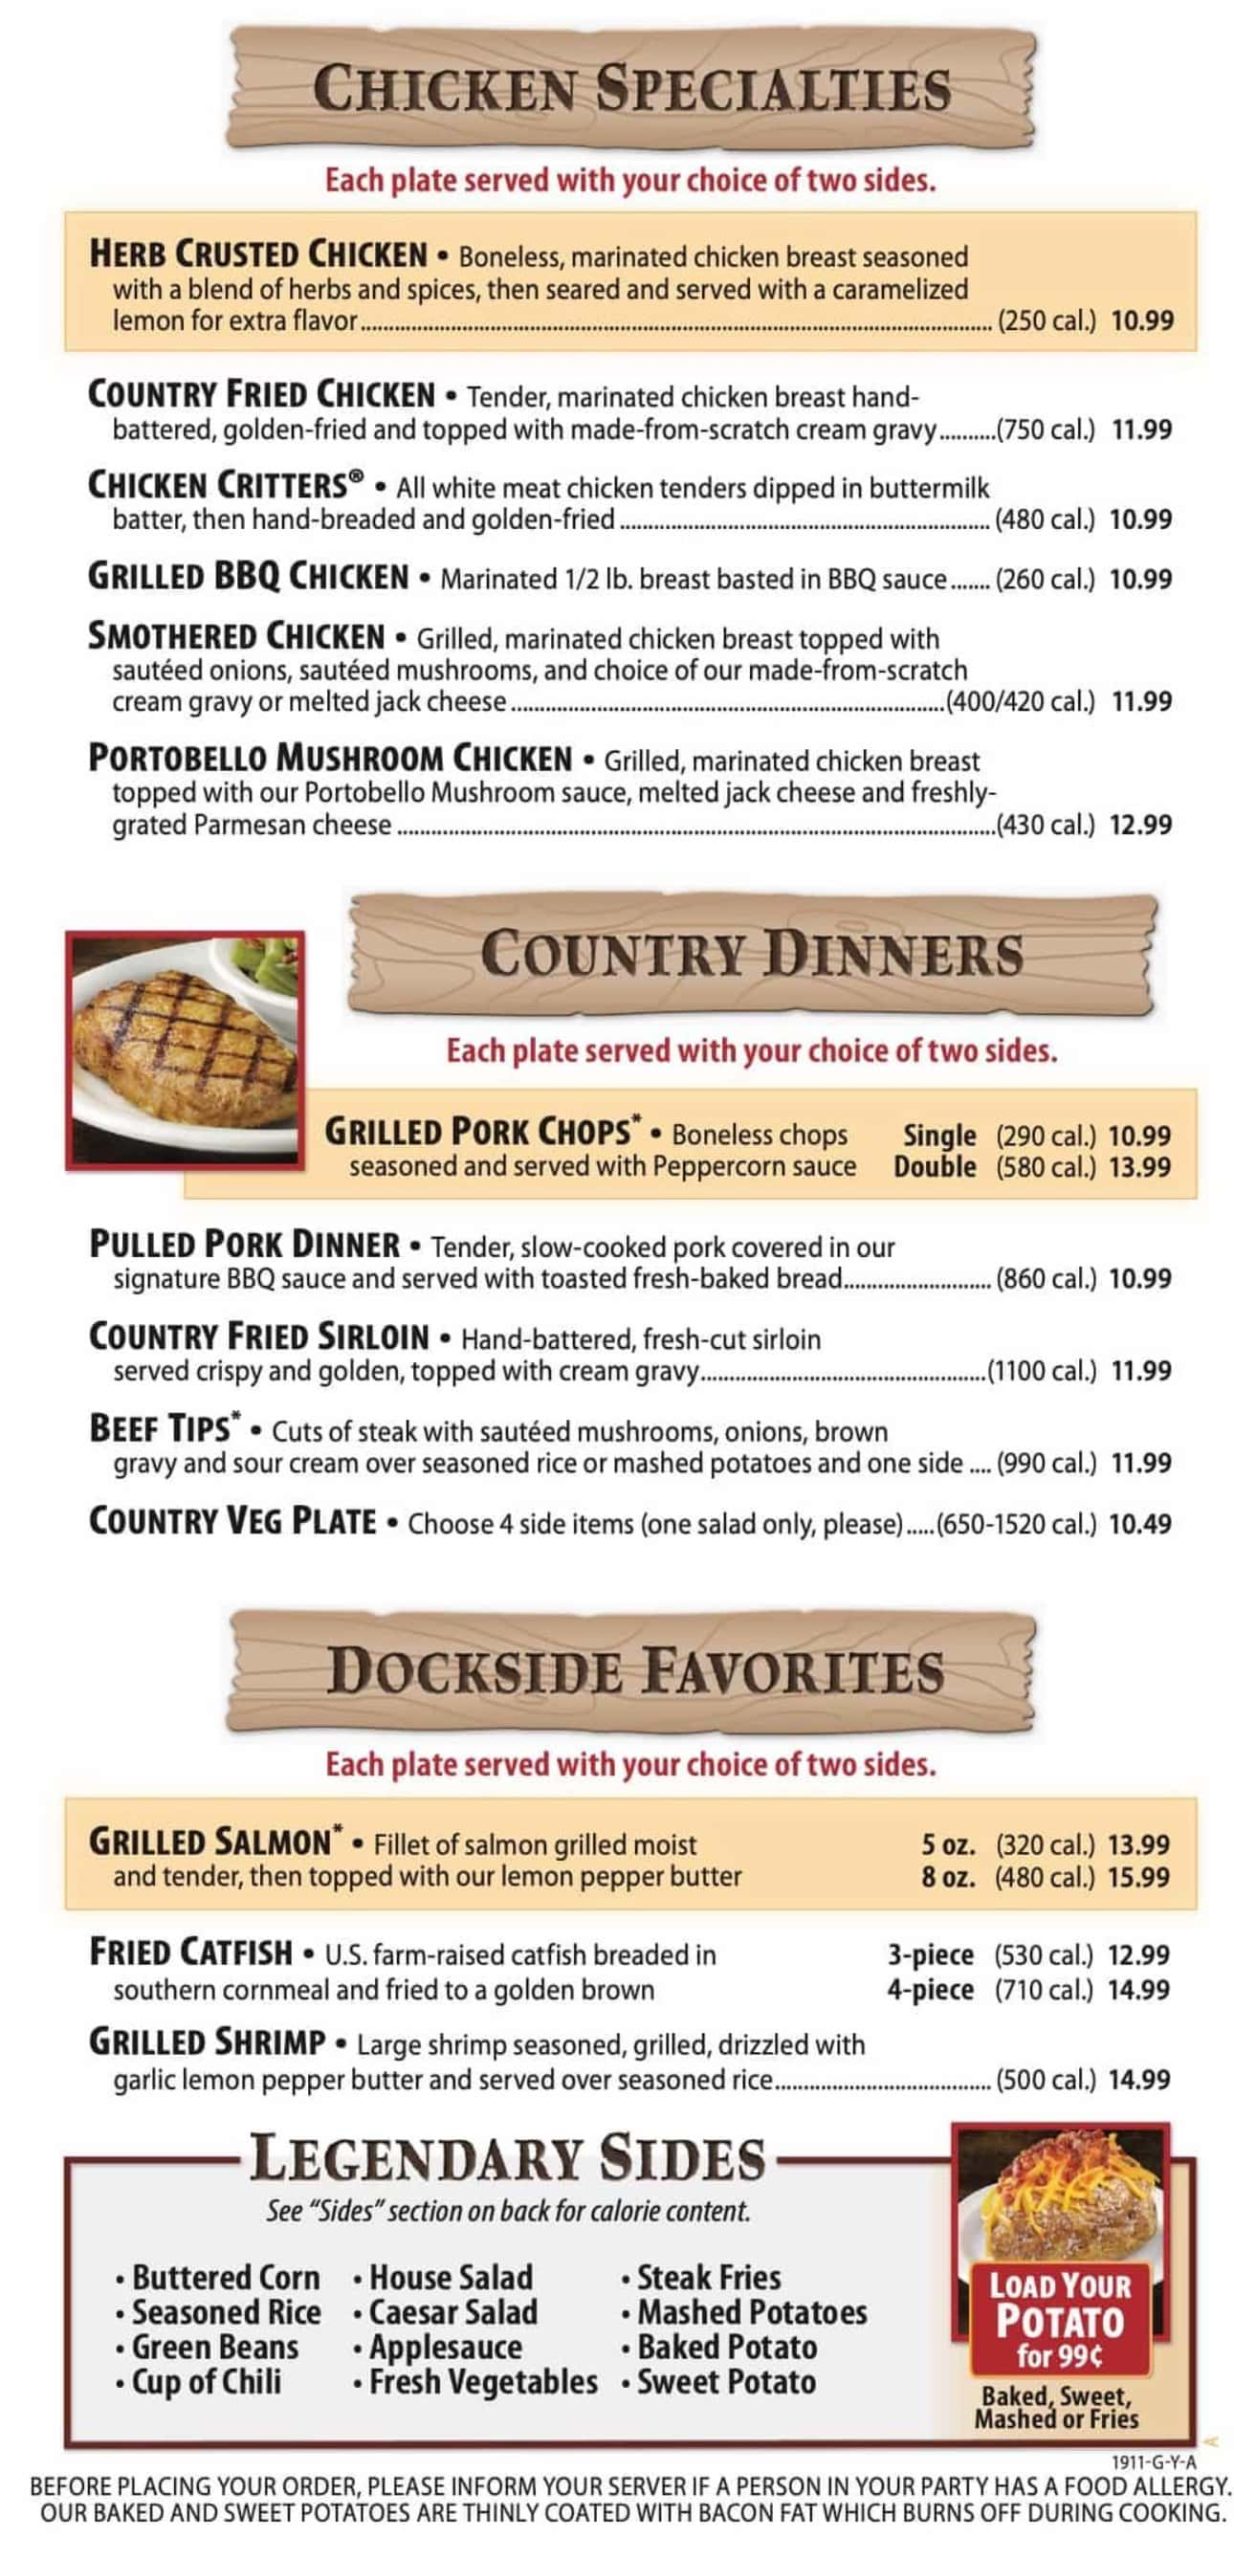 Texas Roadhouse Chicken and Country Dinners Menu